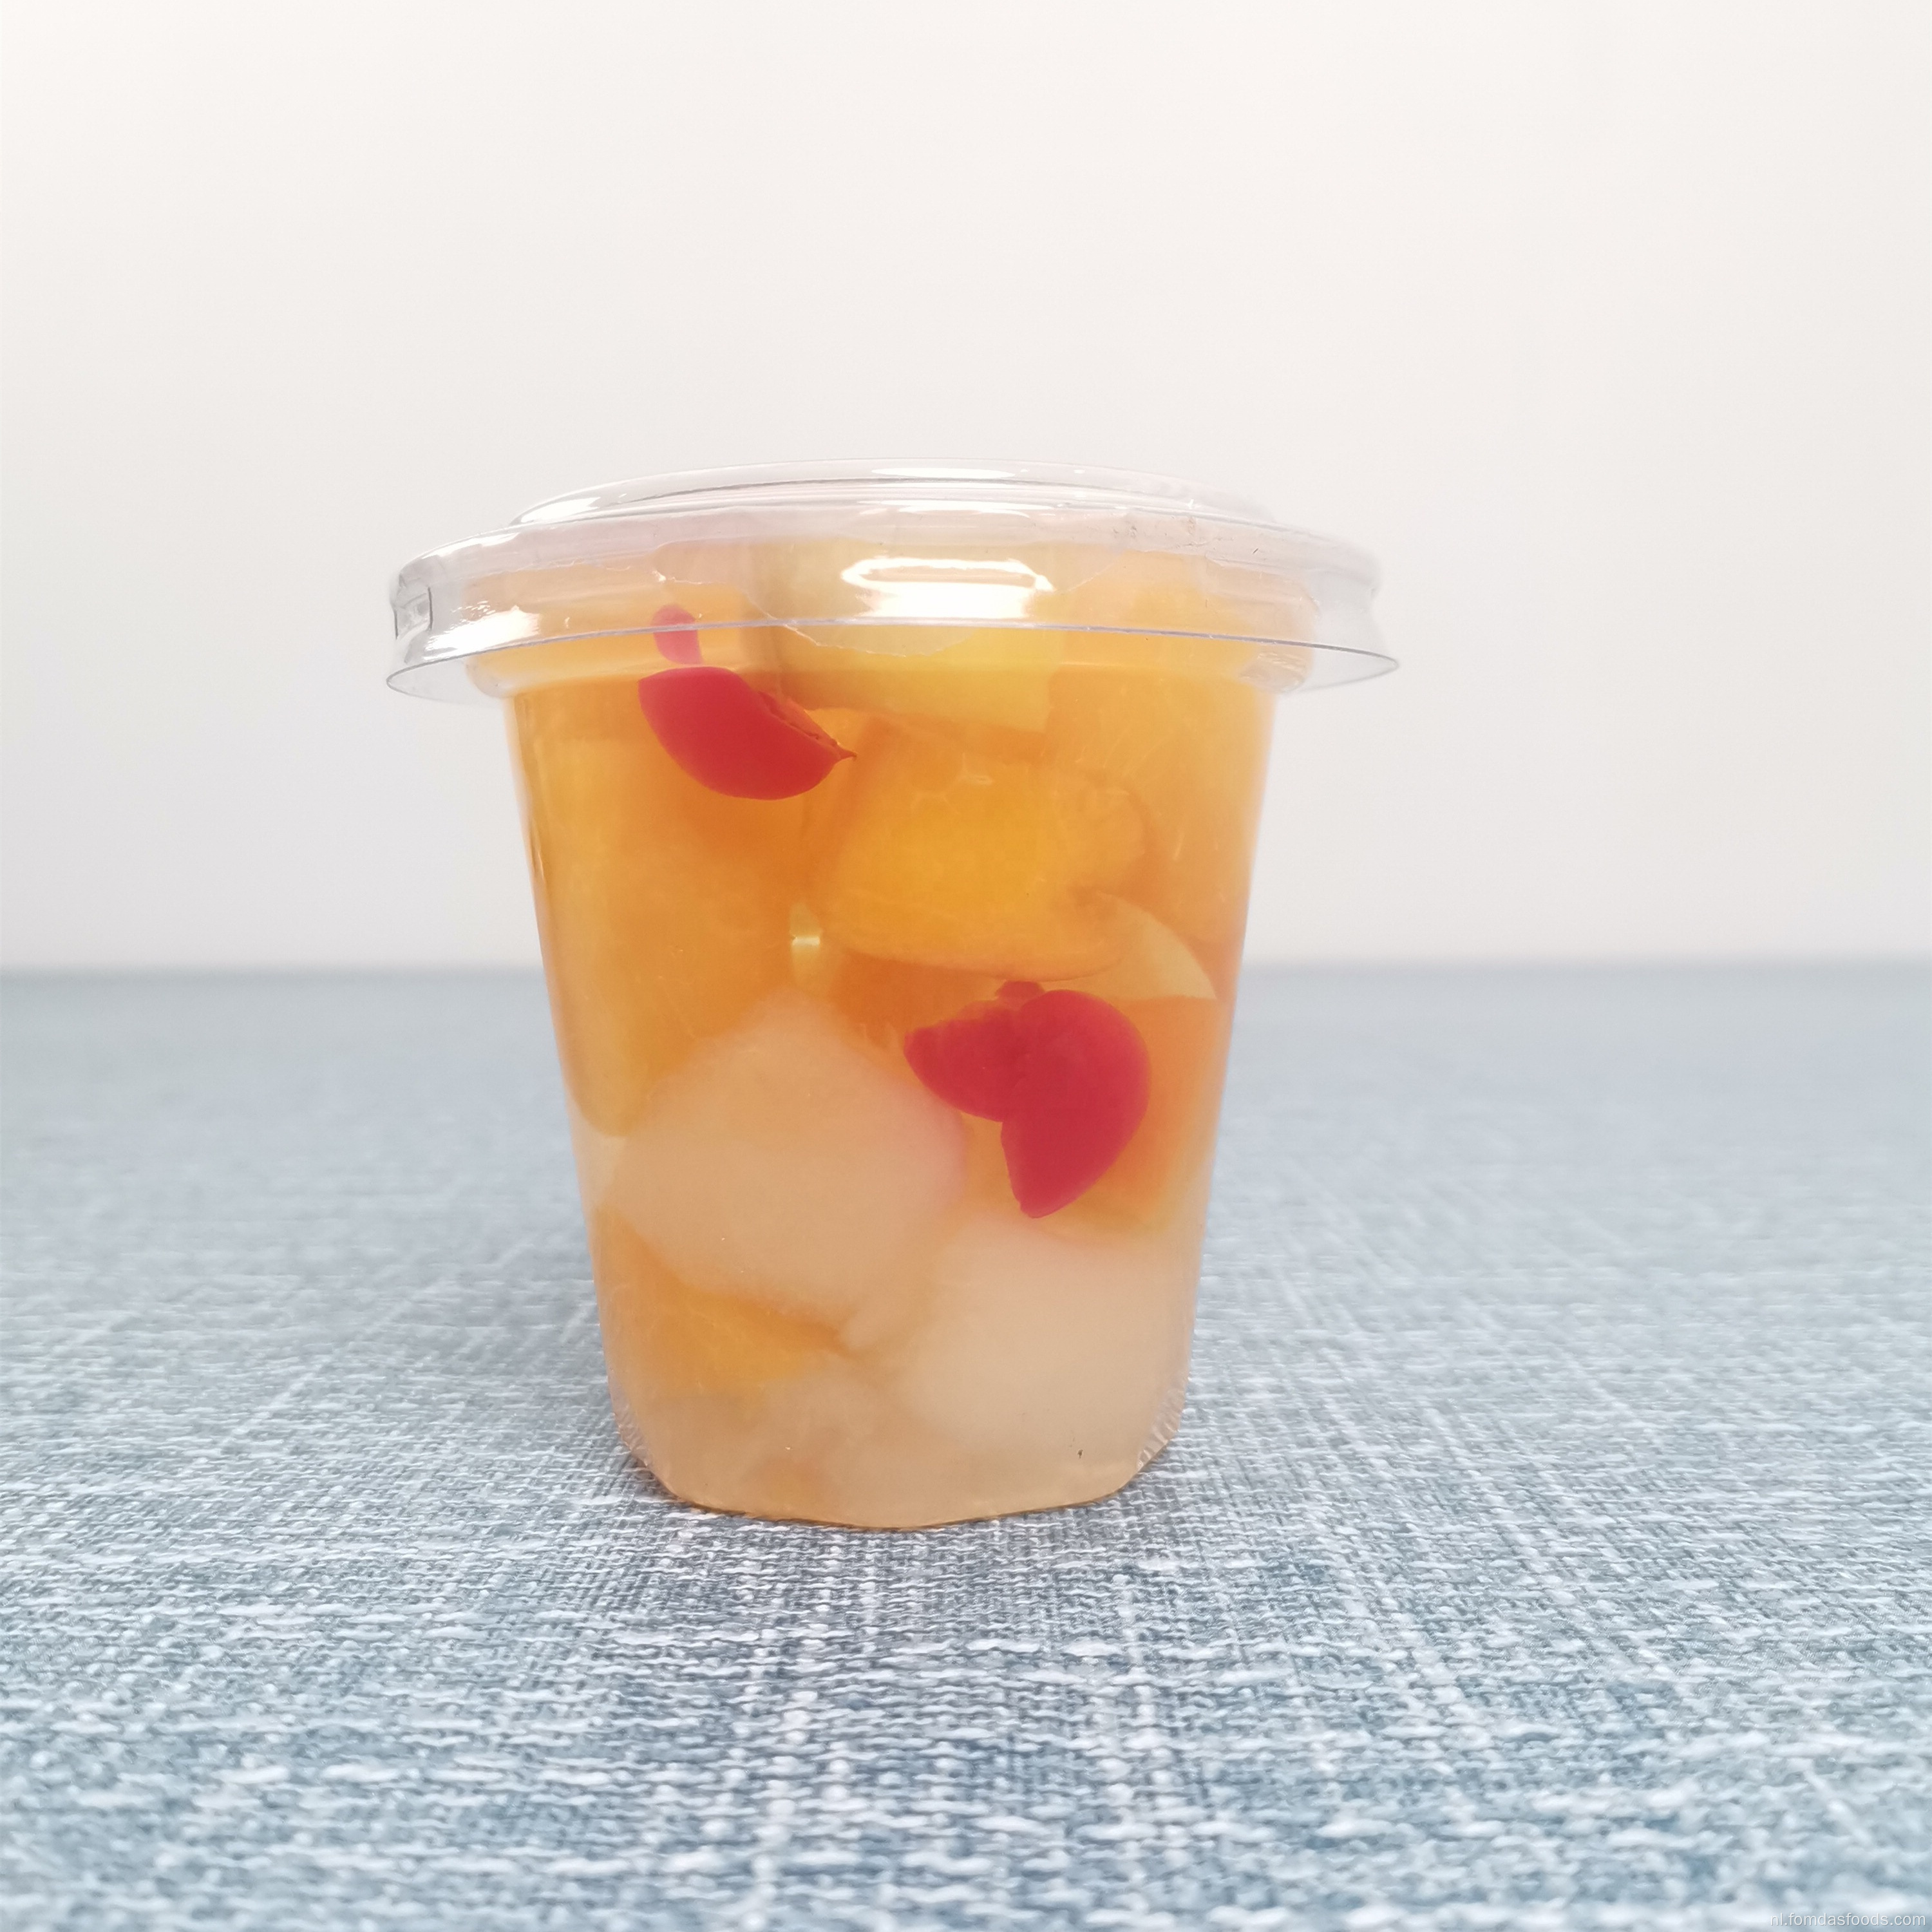 7oz snack cup fruit cocktail in lichte siroop